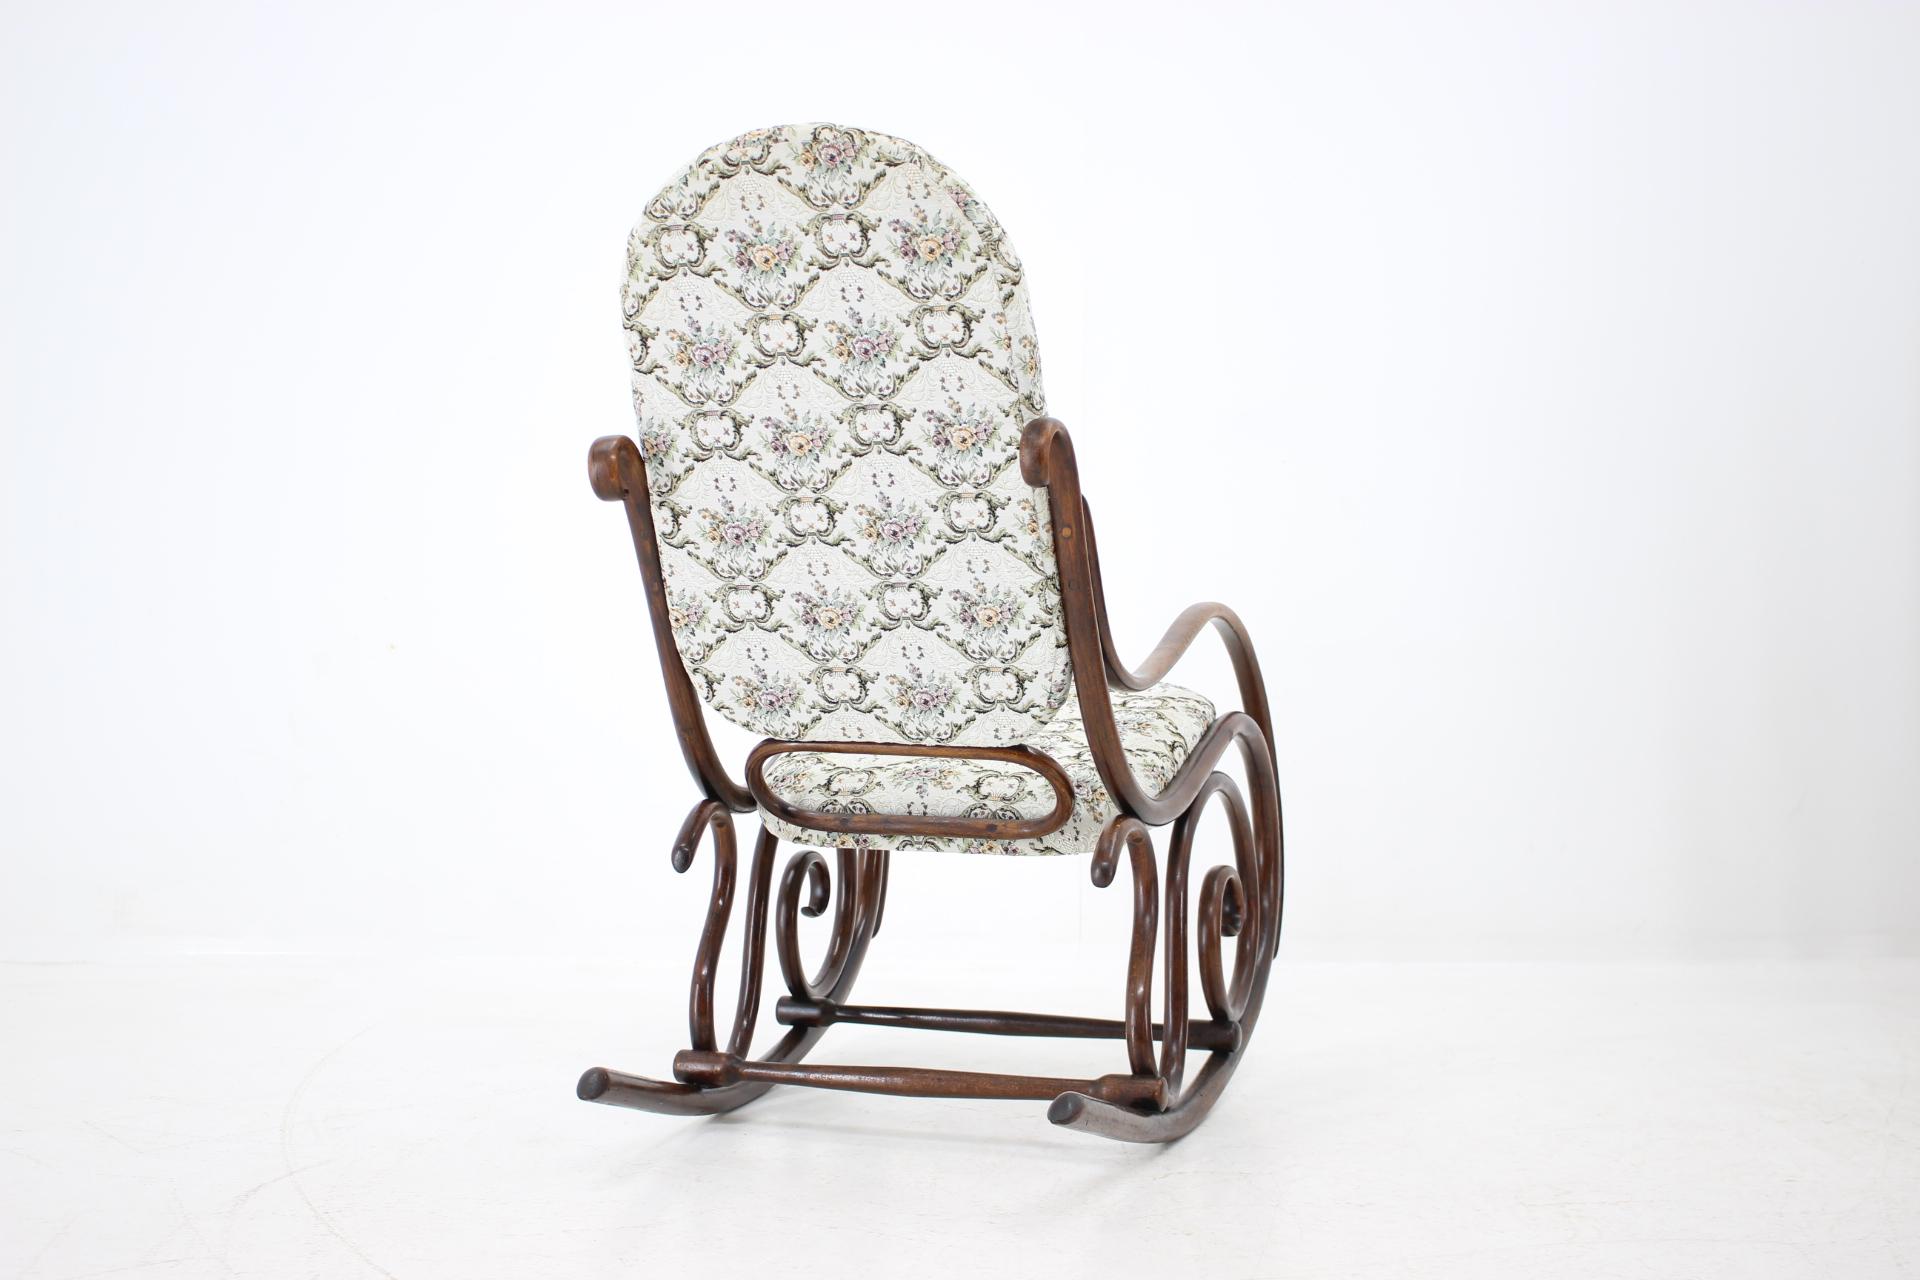 Late 19th Century Antique Small Rocking Chair /Gebruder Thonet, 1881